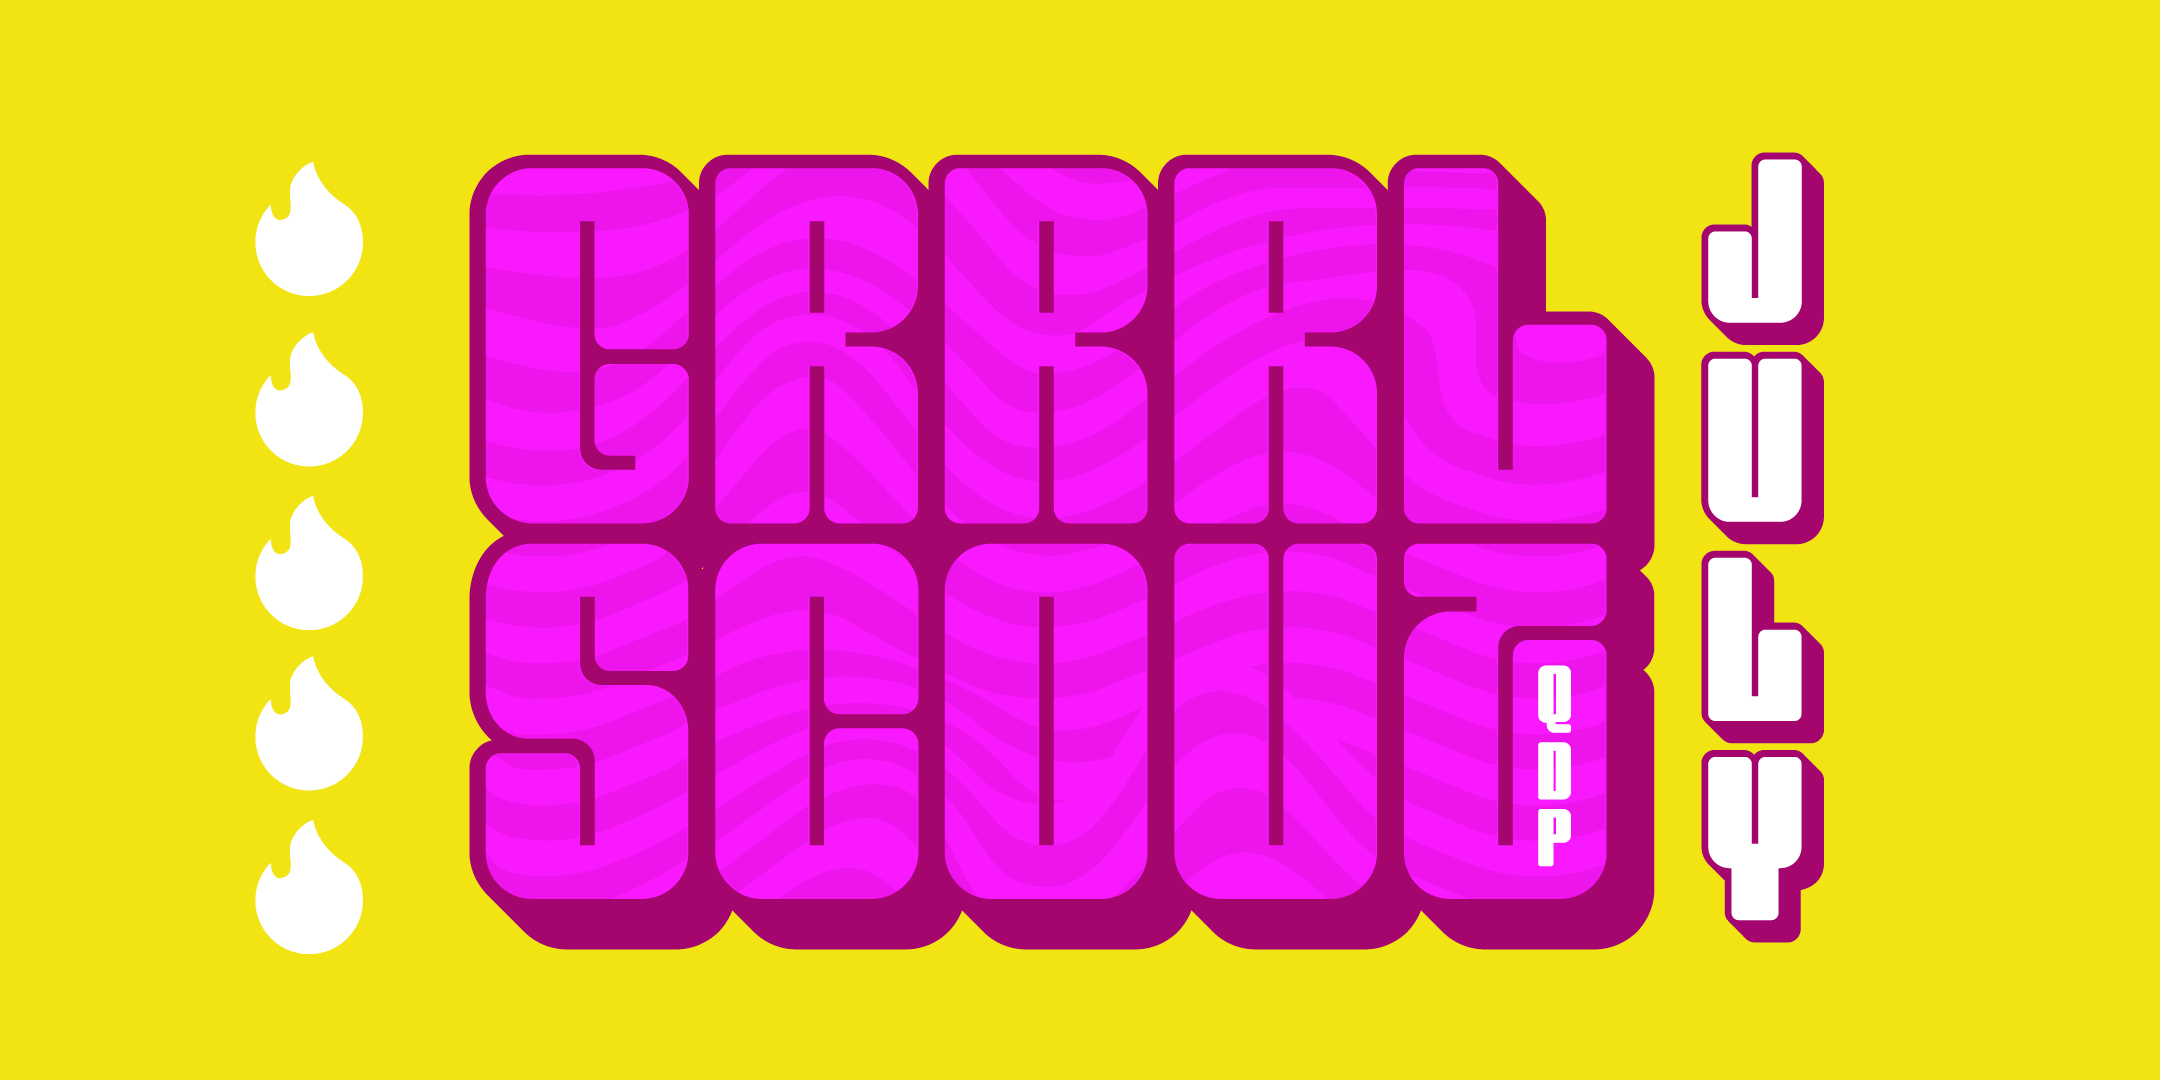 GRRRL SCOUT: July Queer Dance Party Saturday July 8, 2023 9:30 p.m. – 1:00 a.m. Under The Canopy at The Hook and Ladder Theater $10 (+ Fees) Early Bird (Limited Availability) $15 (+ Fees) Advance $20 (+ Fees) Day of Show $30 (Flat) Door (Limited QTY Available)